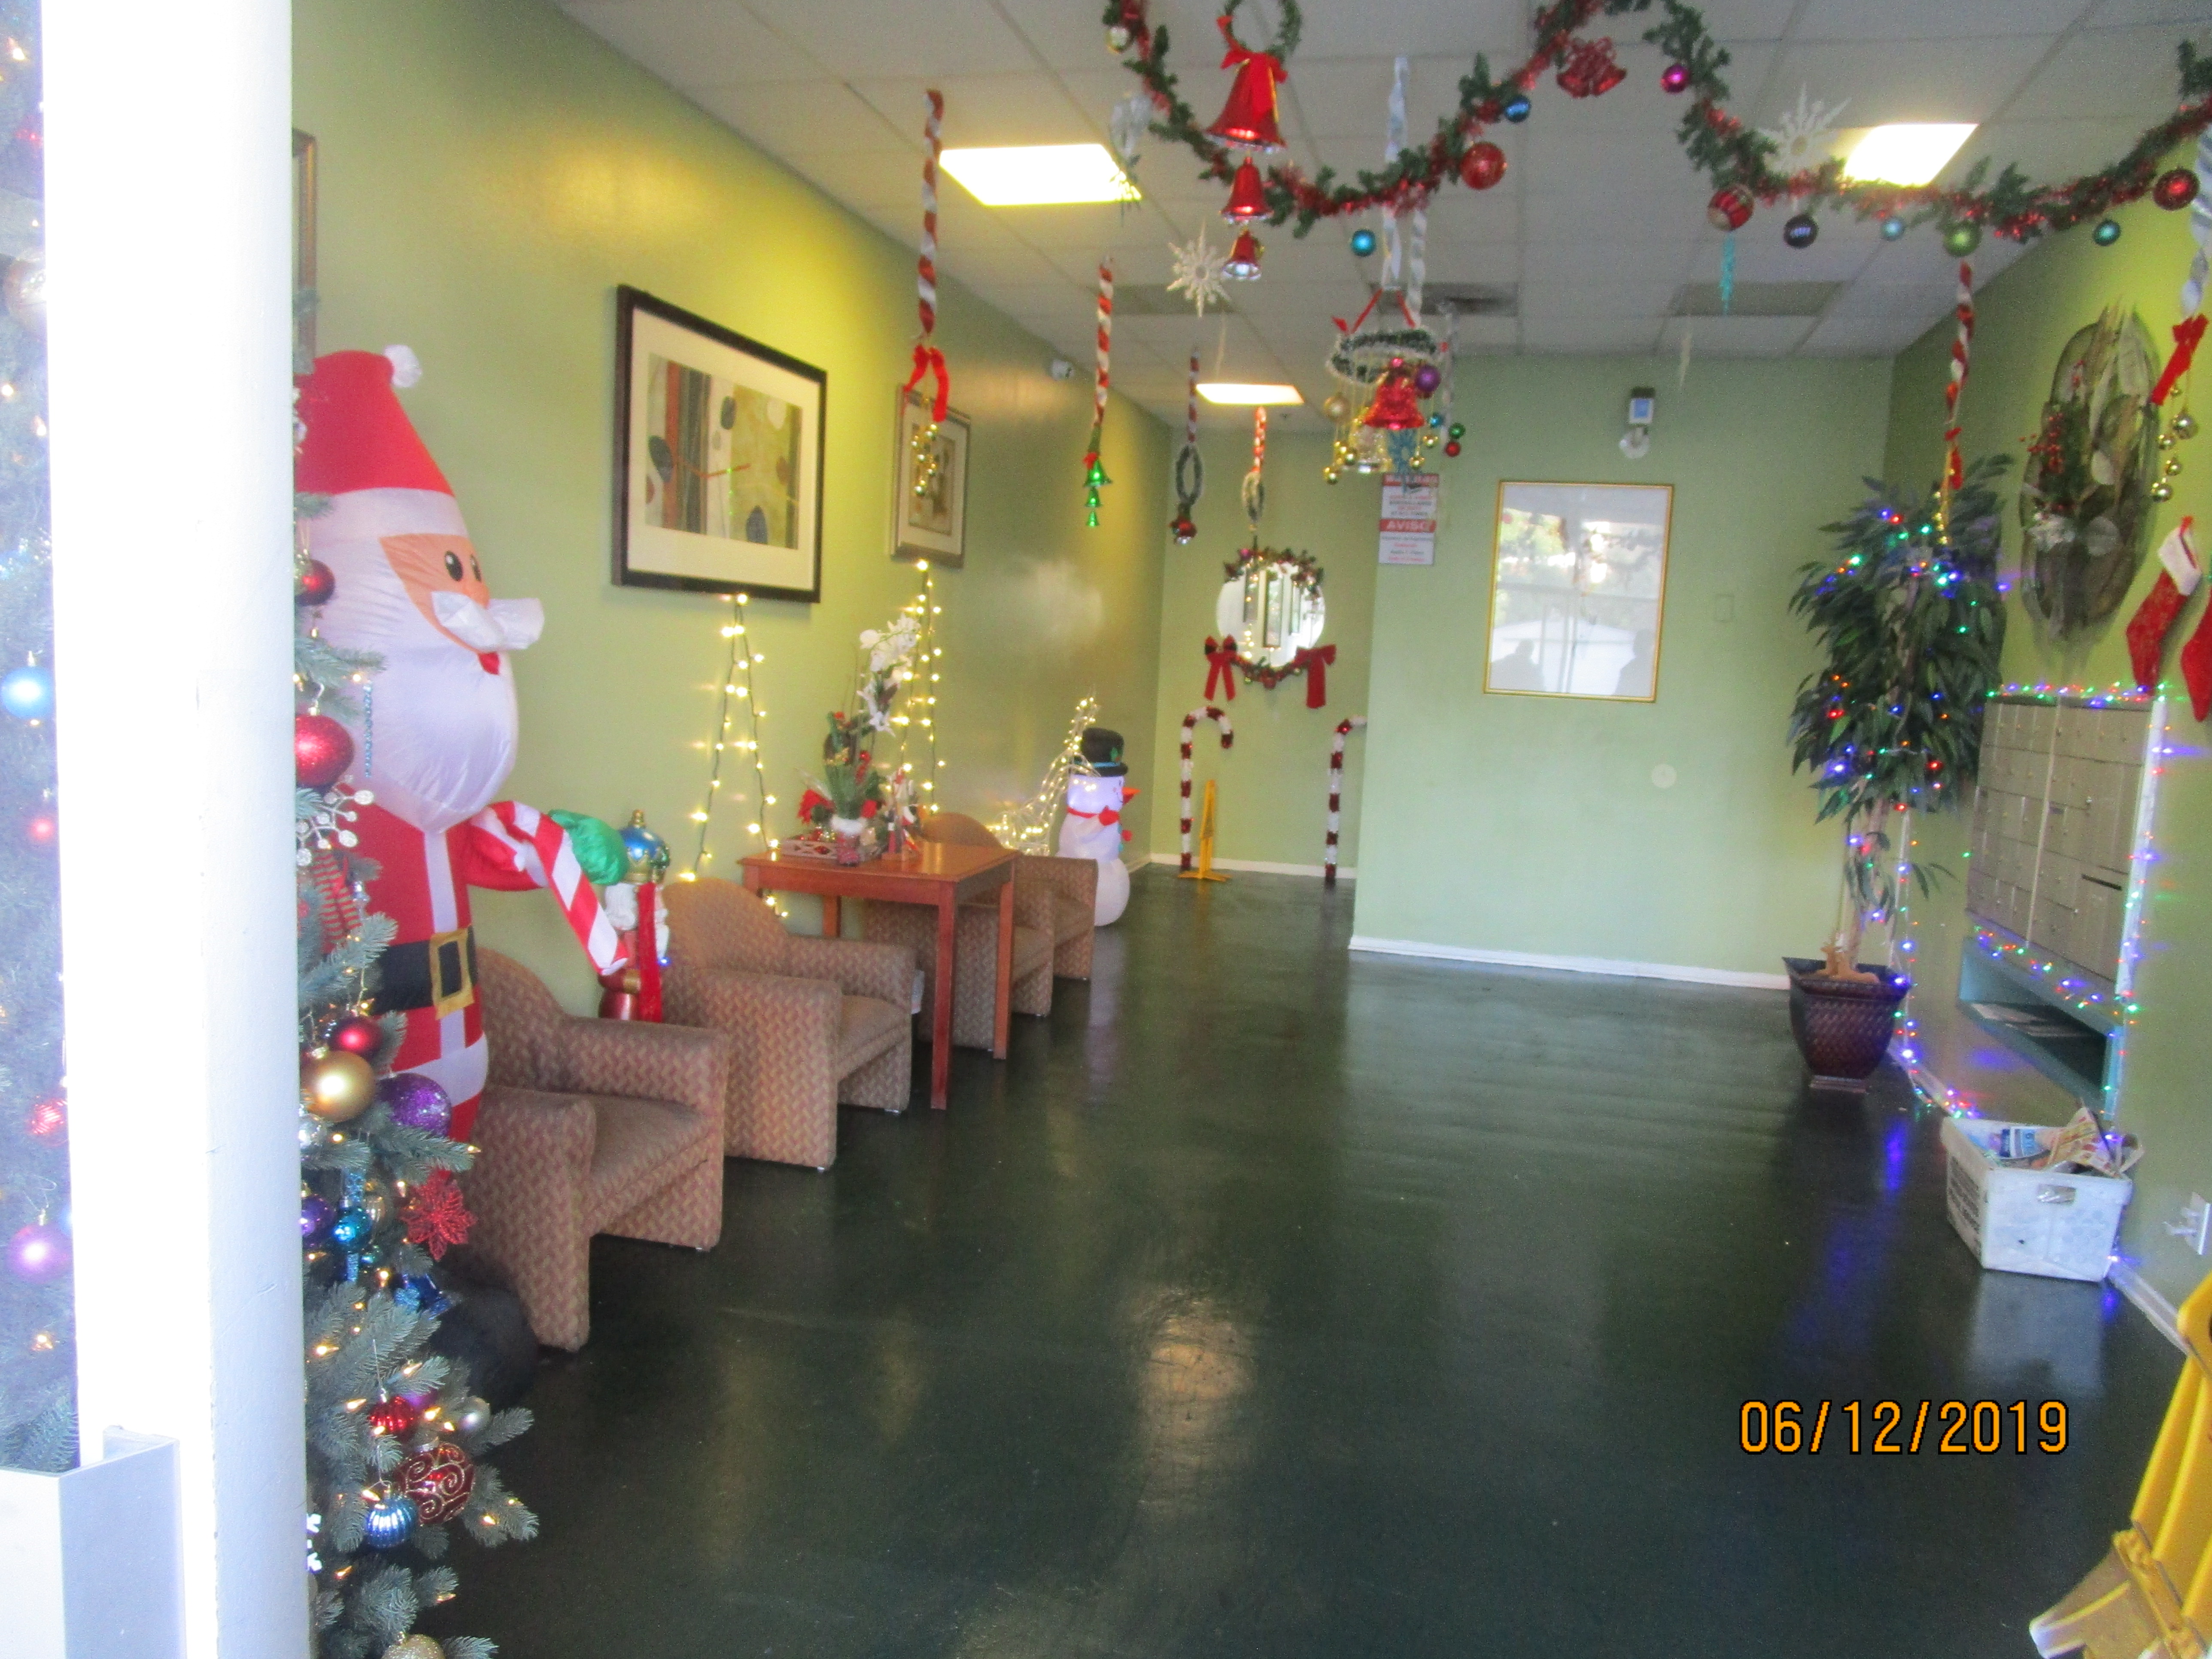 View of a mail room, arm chairs against the light green walls on the left side, a small brown coffee table with Christmas decorations, an inflatable Santa Claus next to a Christmas tree on the left side, an inflatable snowman, tall candy canes and Christm